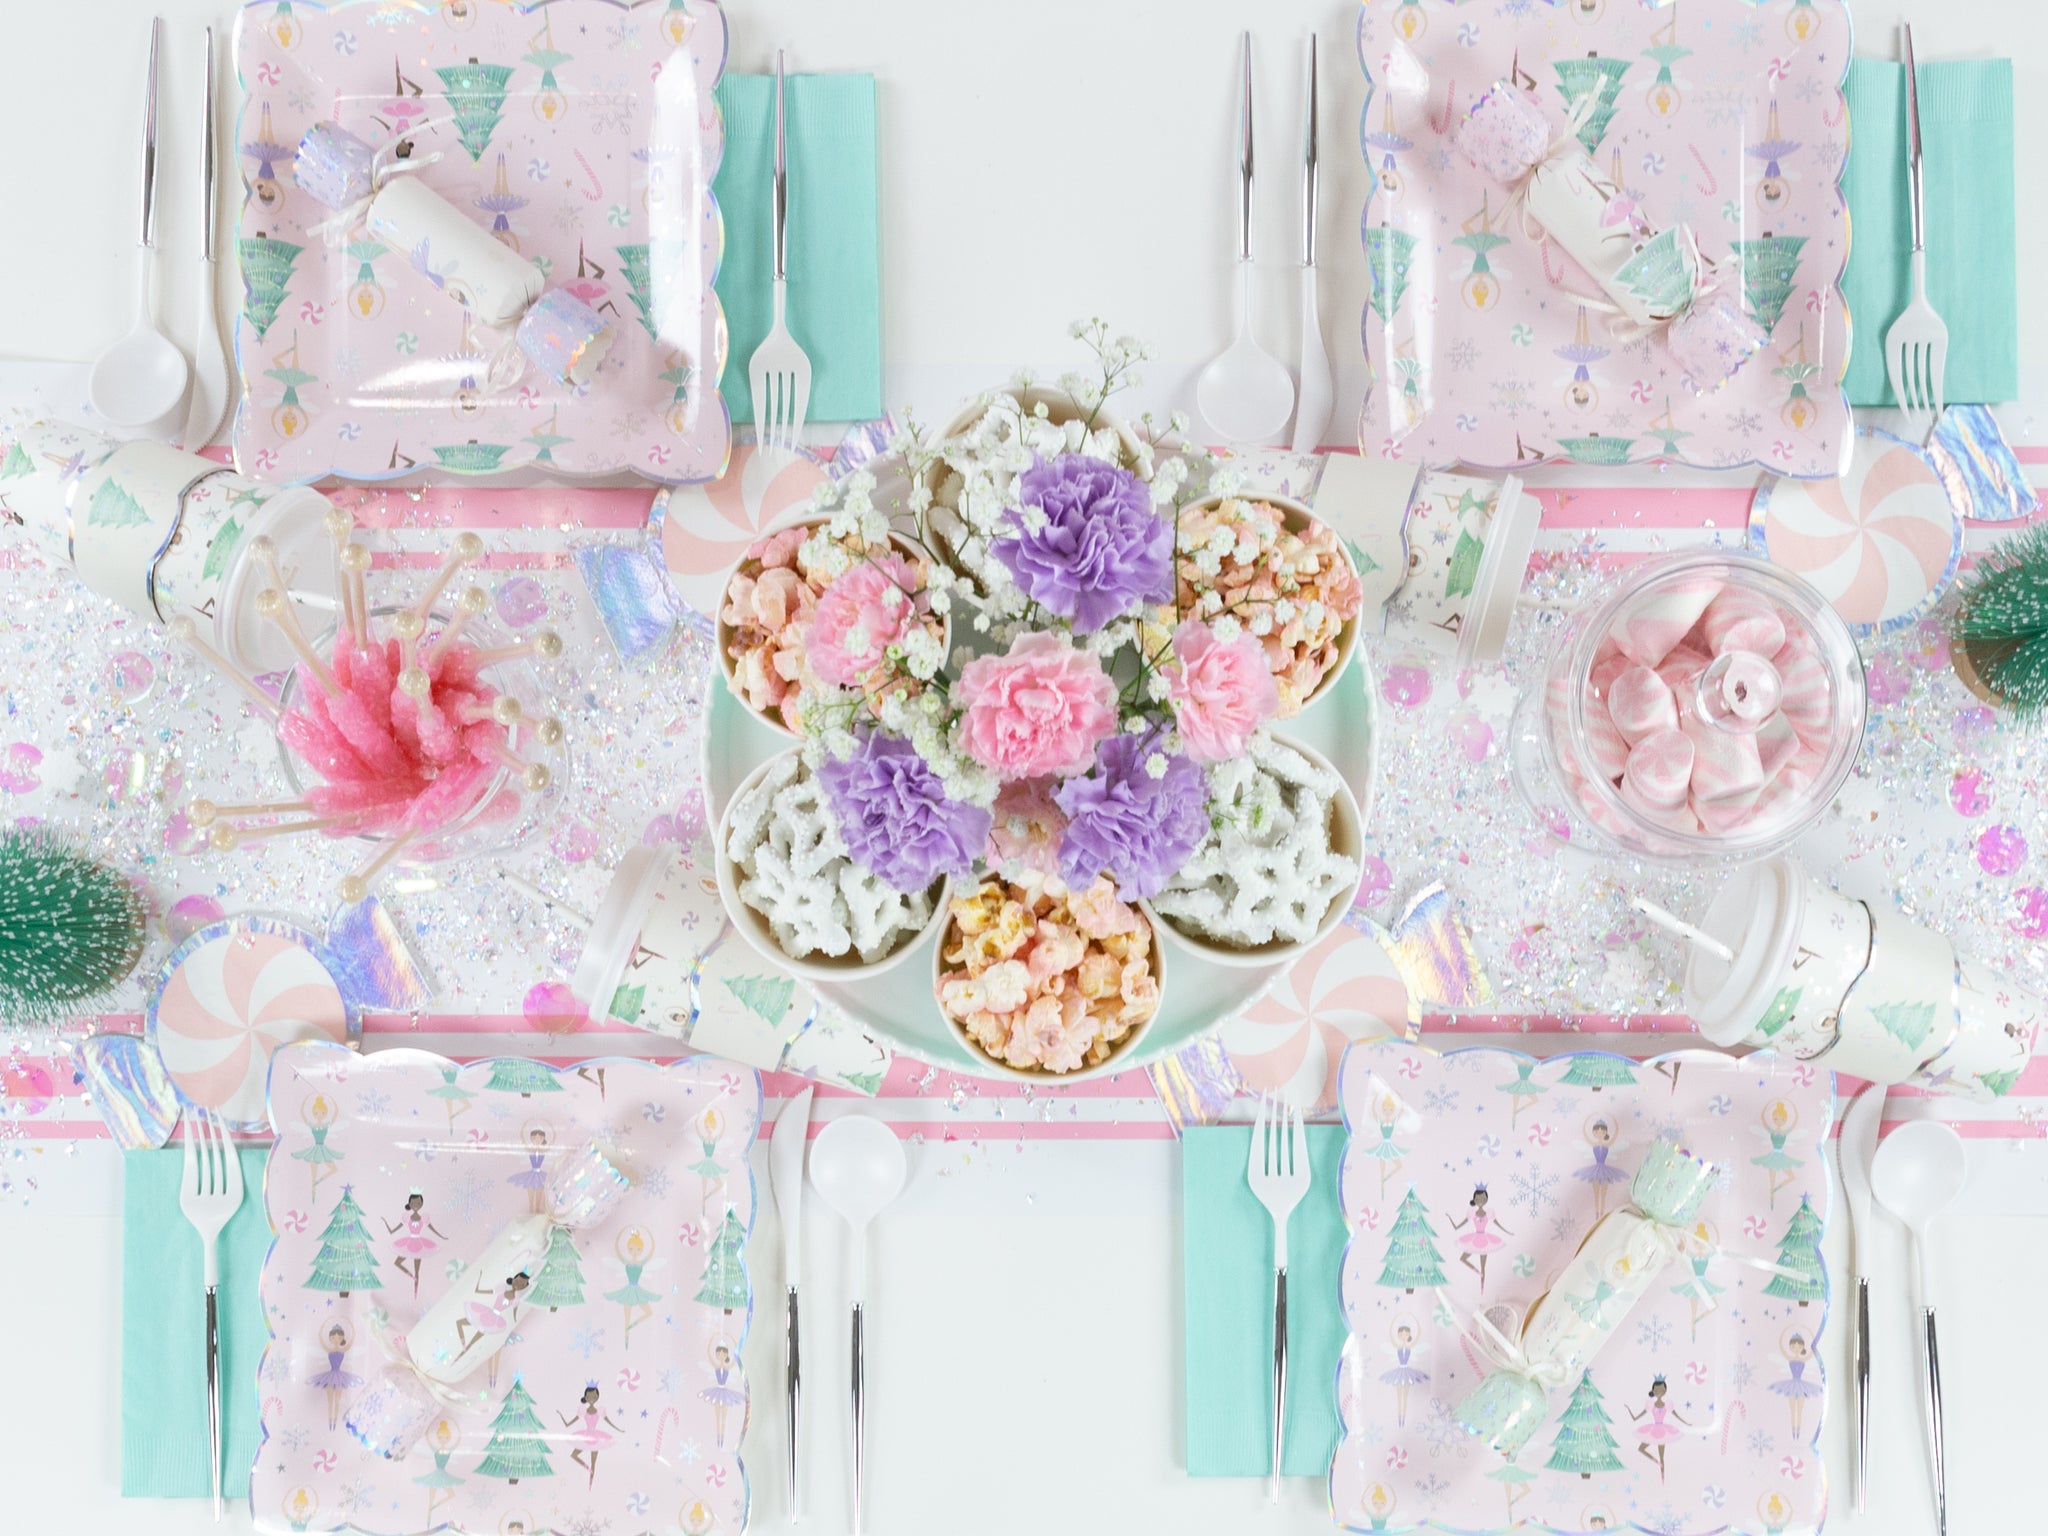 Sugar Plum Fairy Table Overview | The Party Darling